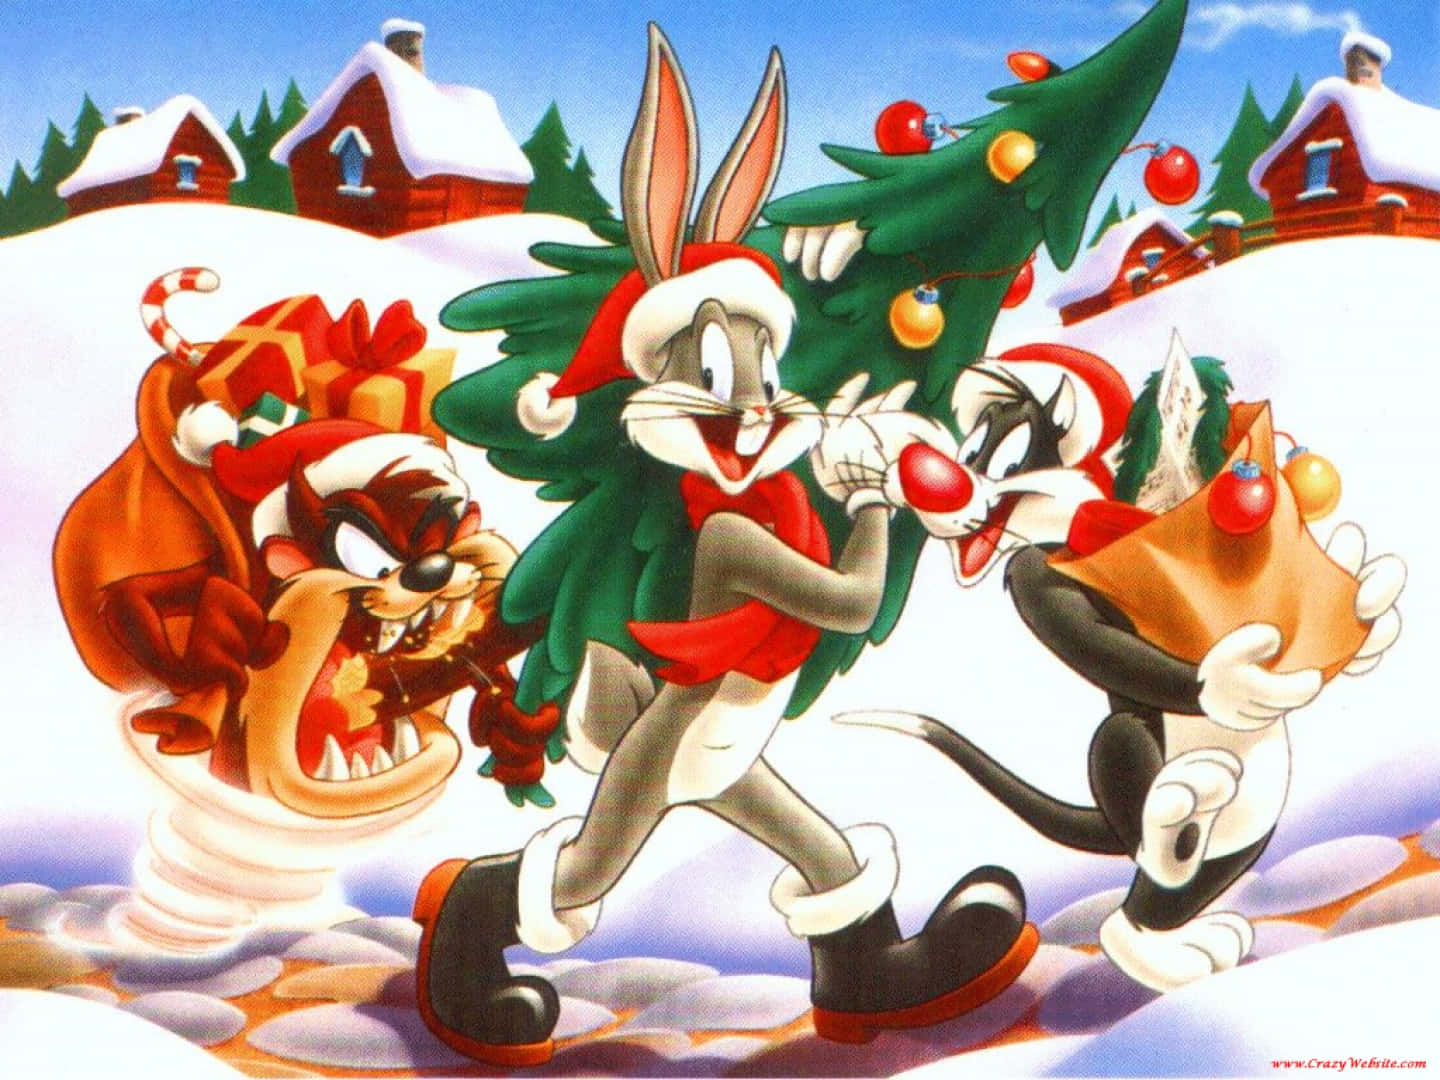 Bugs Bunny, the iconic Looney Tunes Superstar